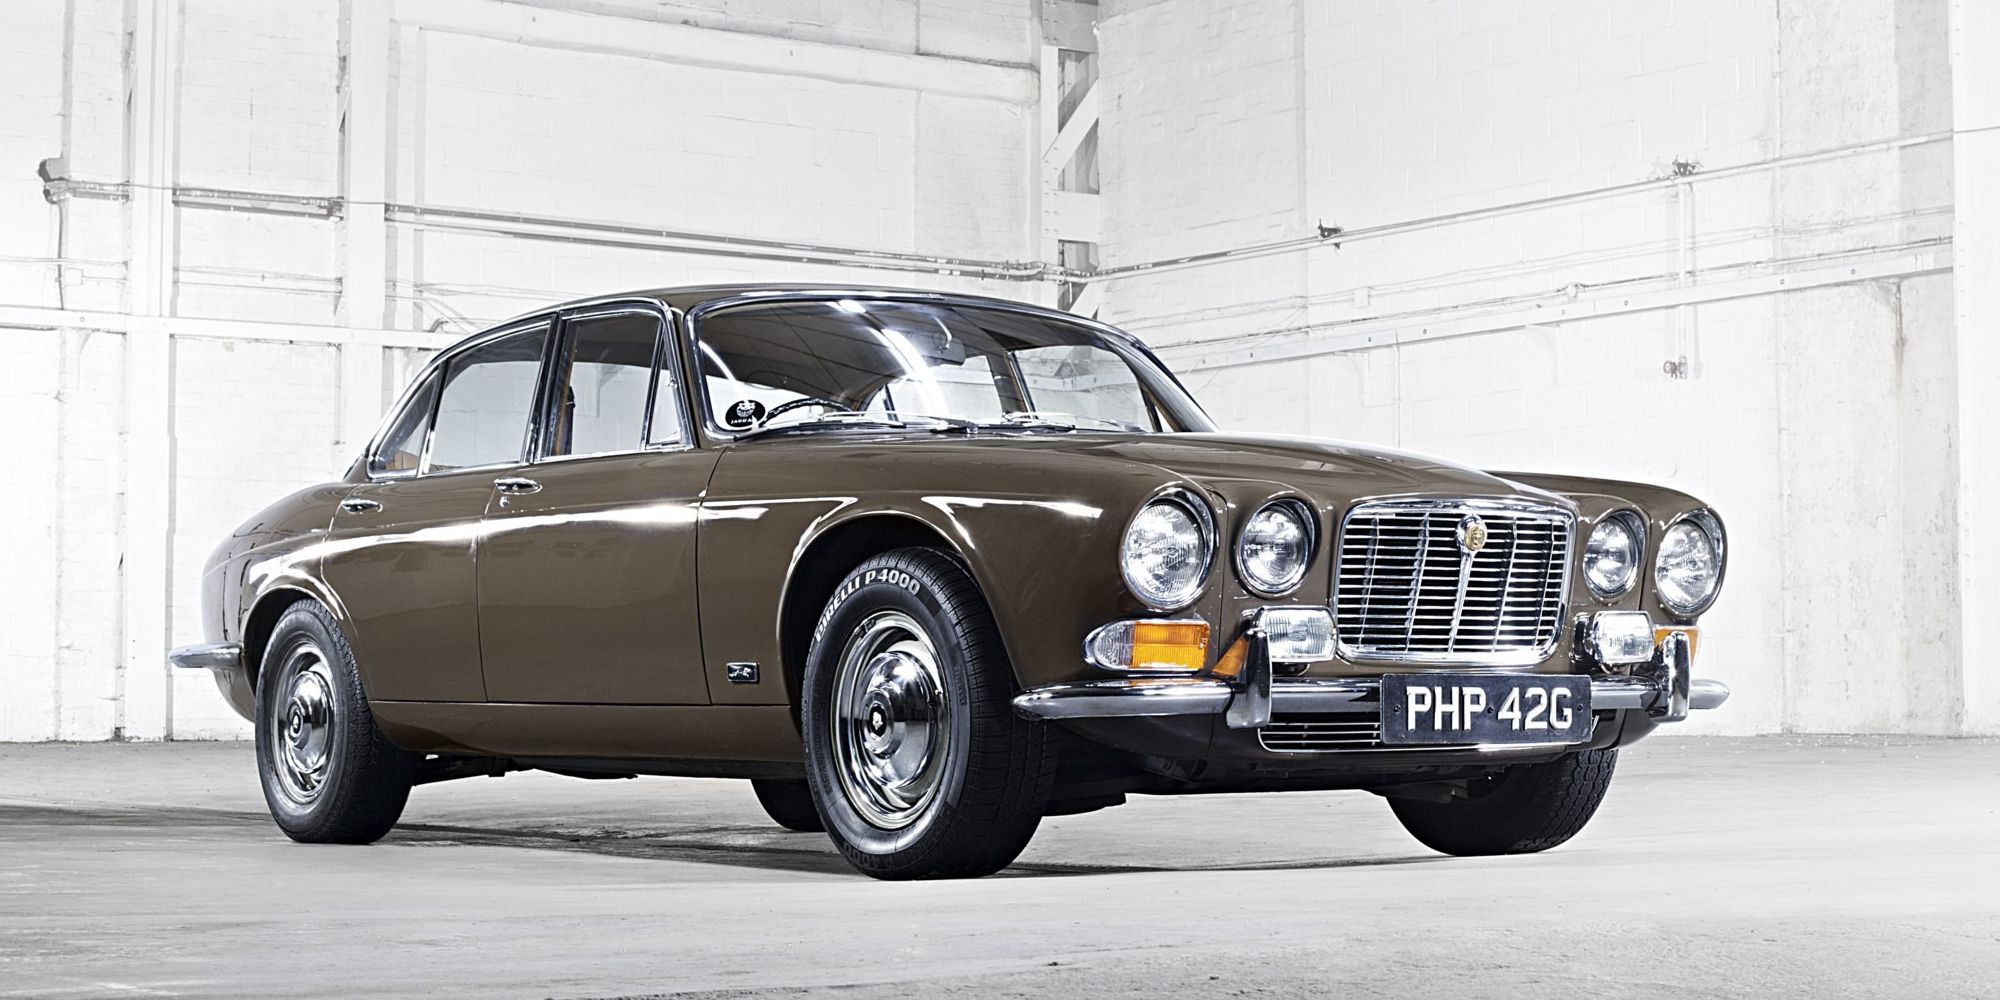 The front of the Series I Jaguar XJ6